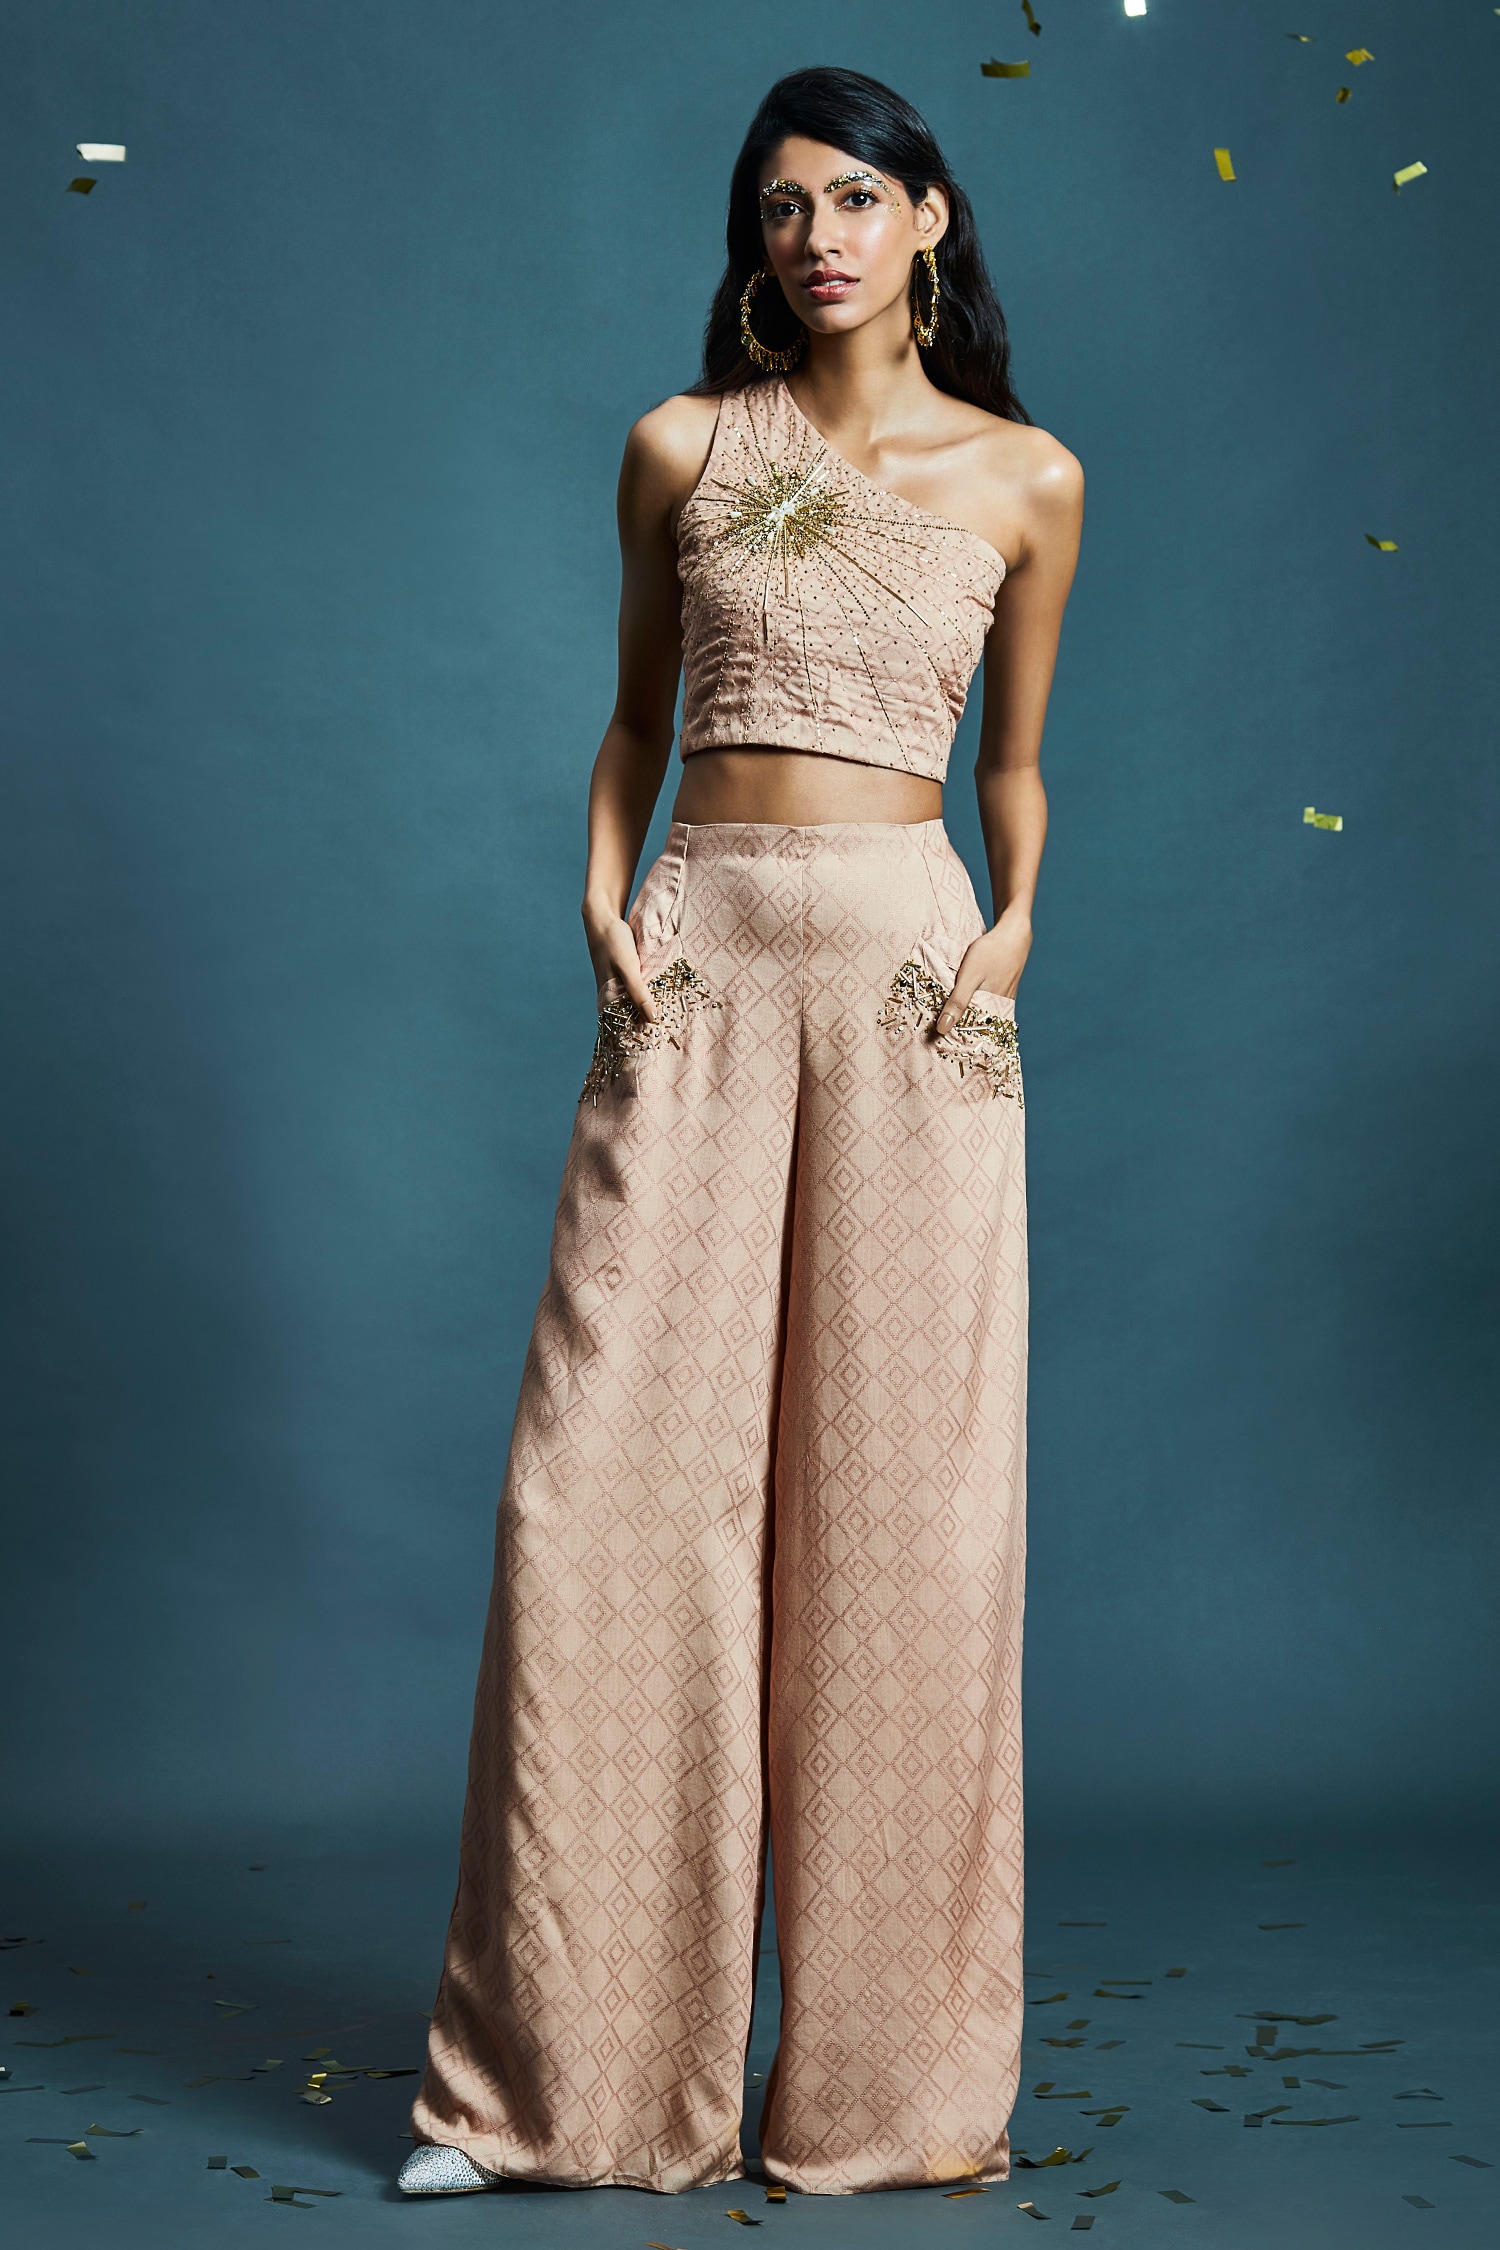 Palazzo Pant - Buy Latest Palazzo Pants Online in India | Myntra